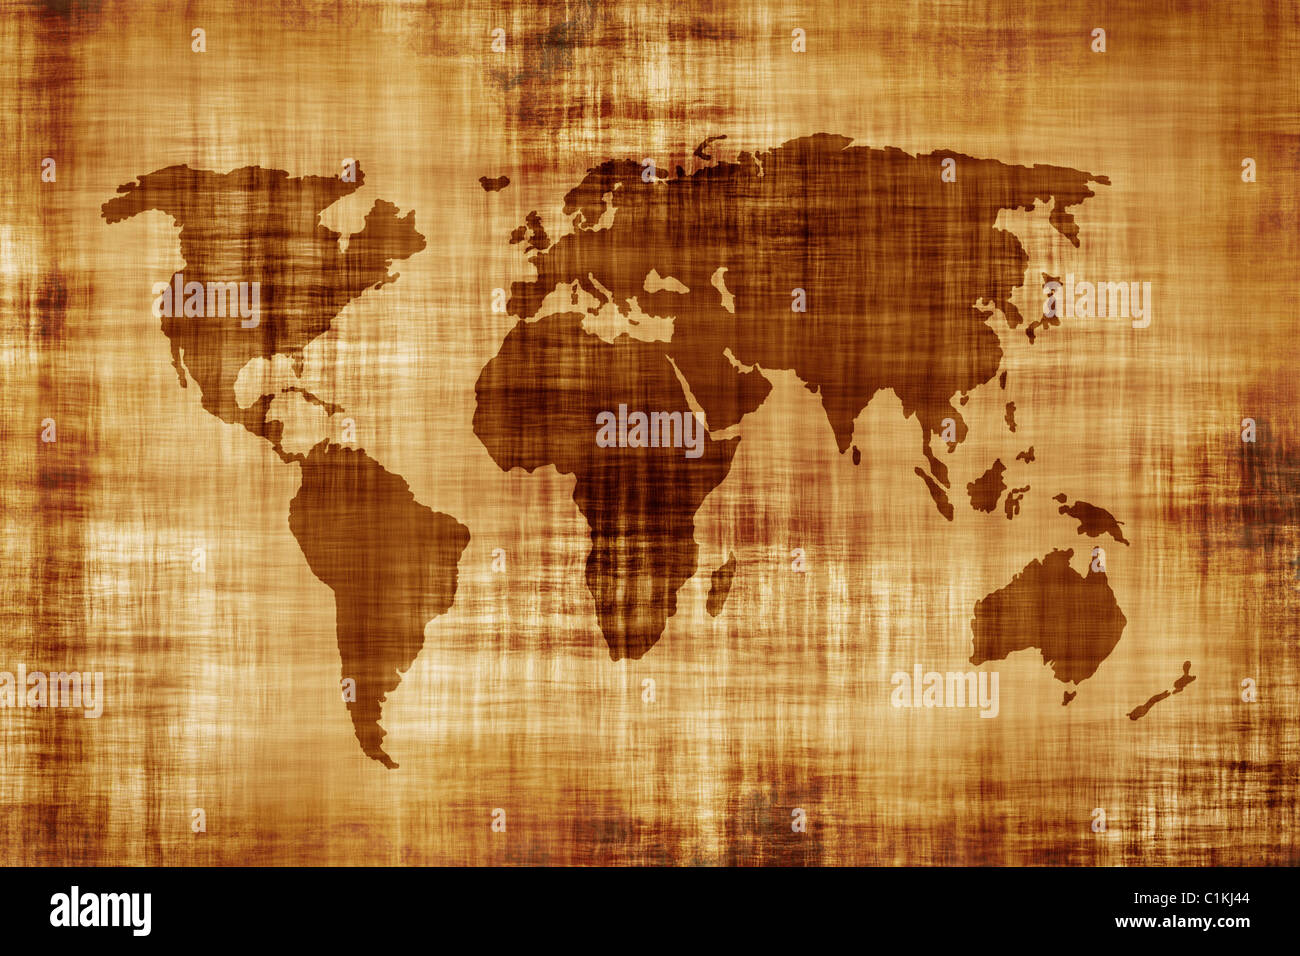 world map on a brown background Stock Photo - Alamy